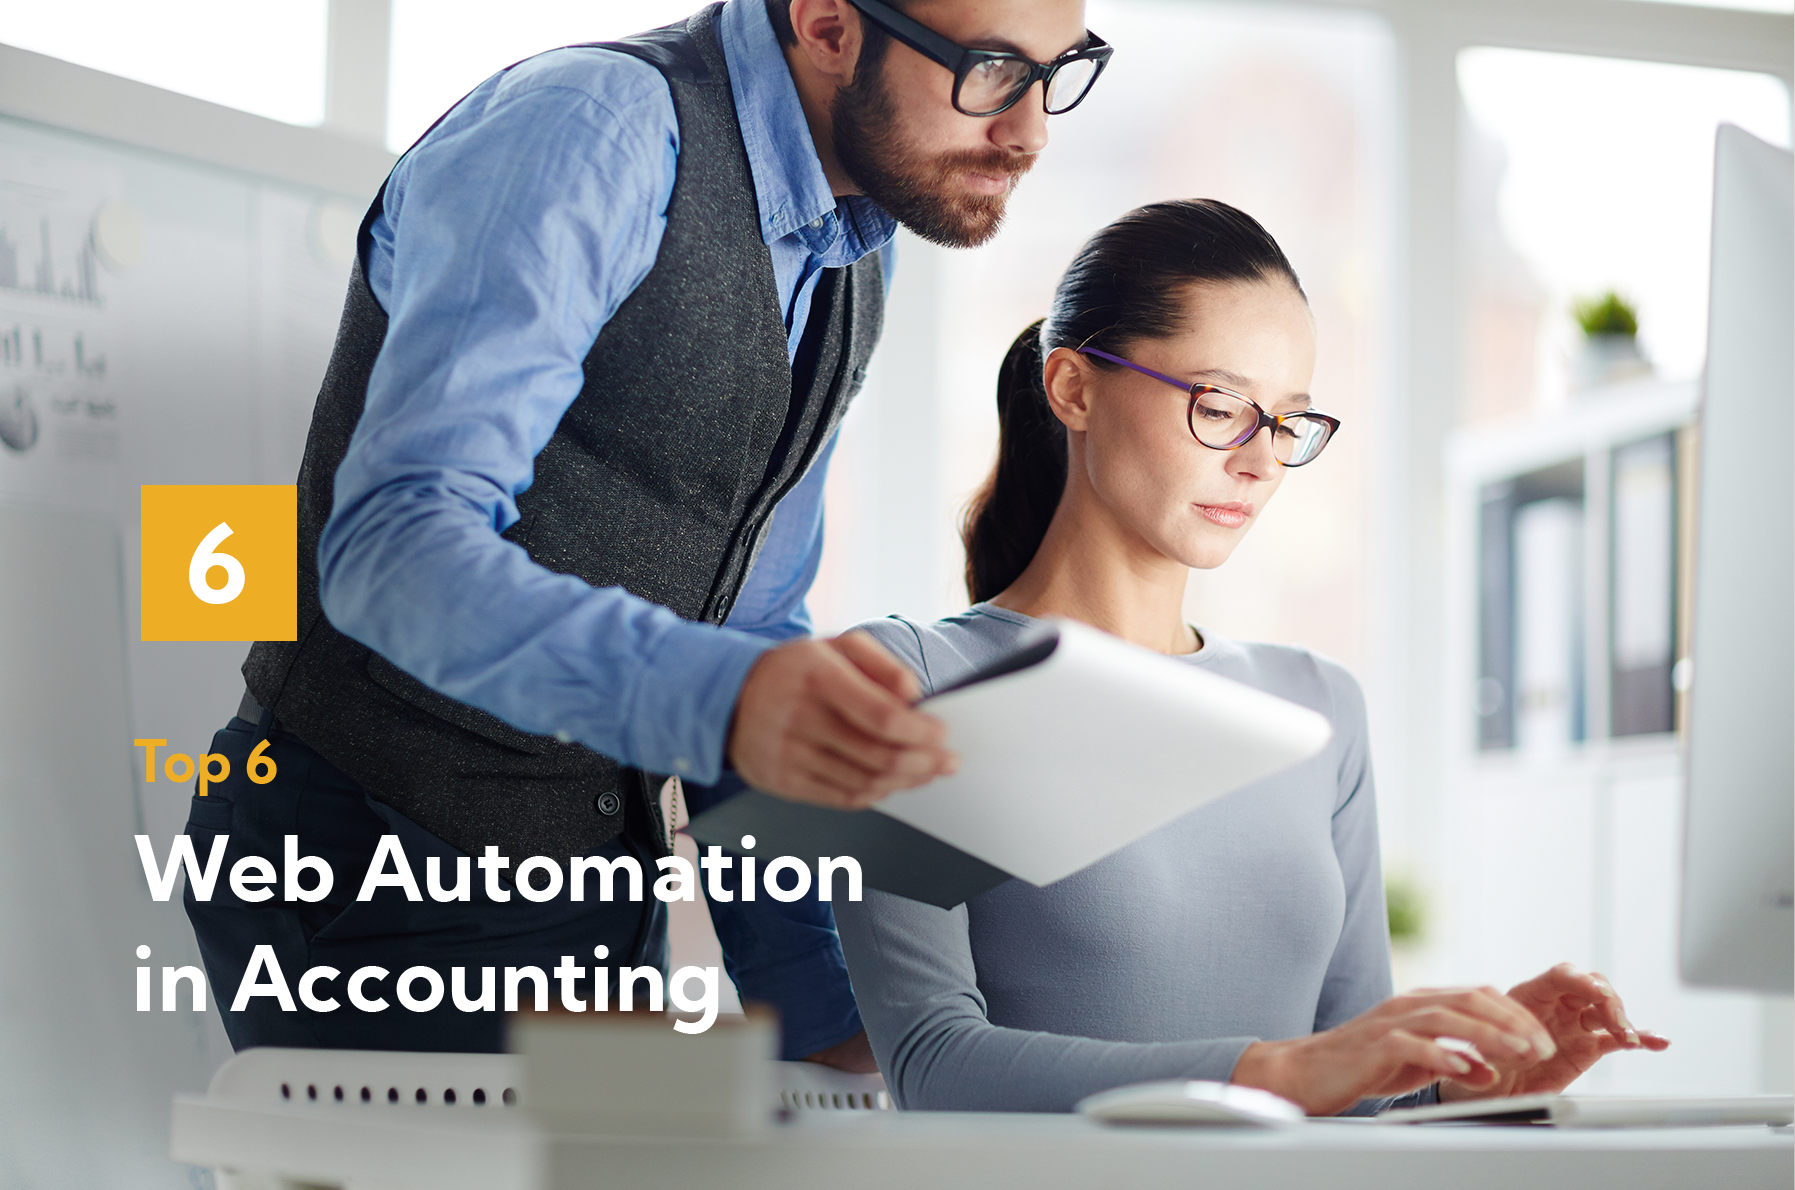 Web Automation in Accounting